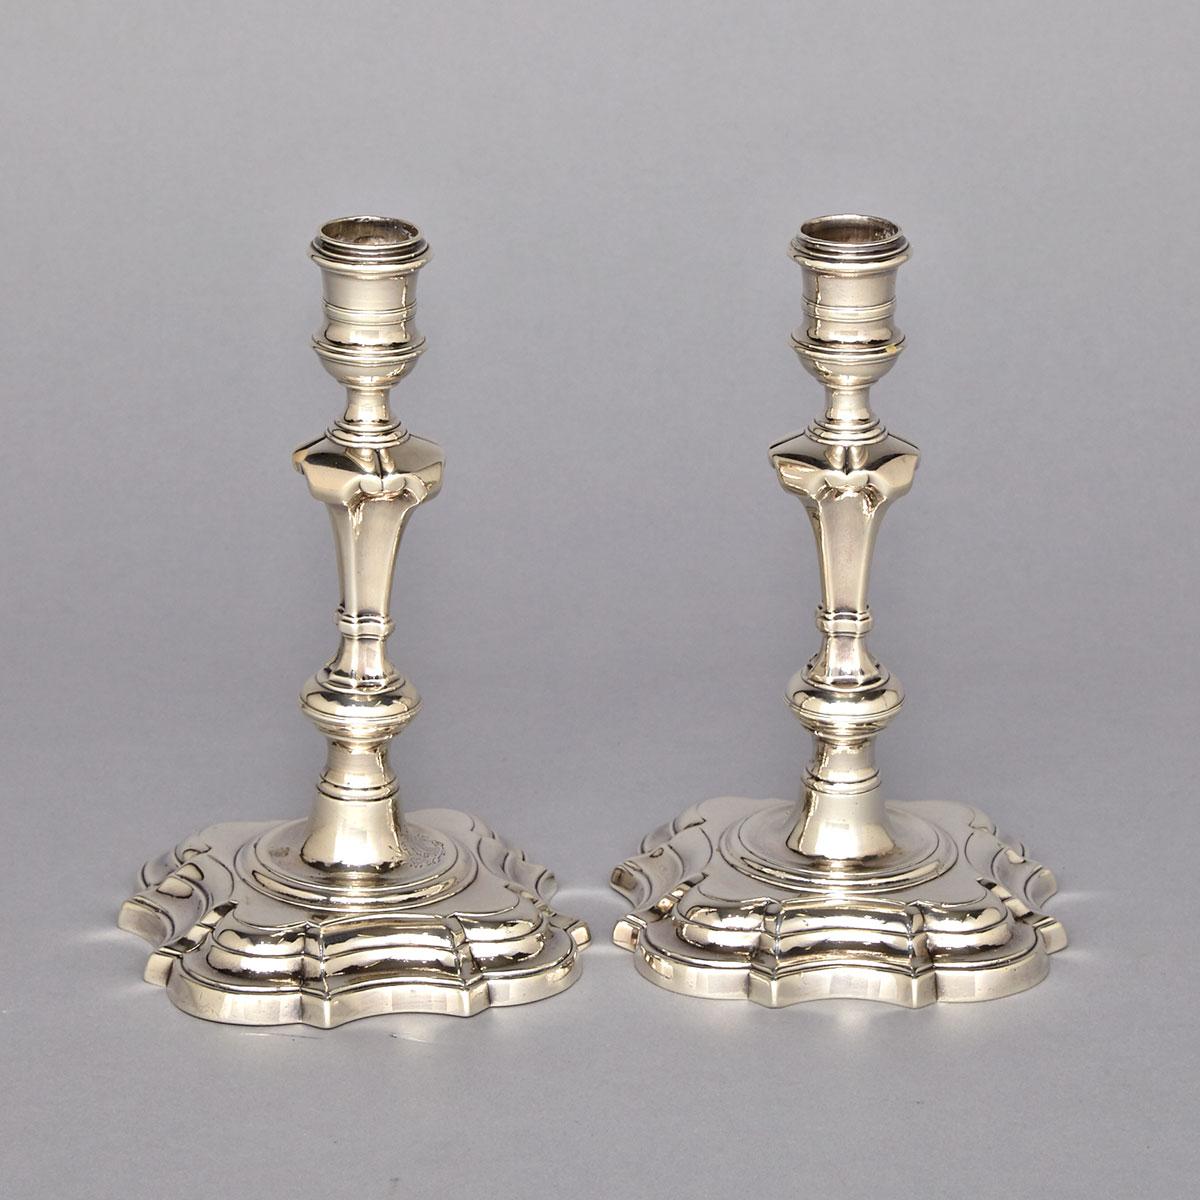 Pair of George II Silver Table Candlesticks, Peter Archambo I, London, 1742